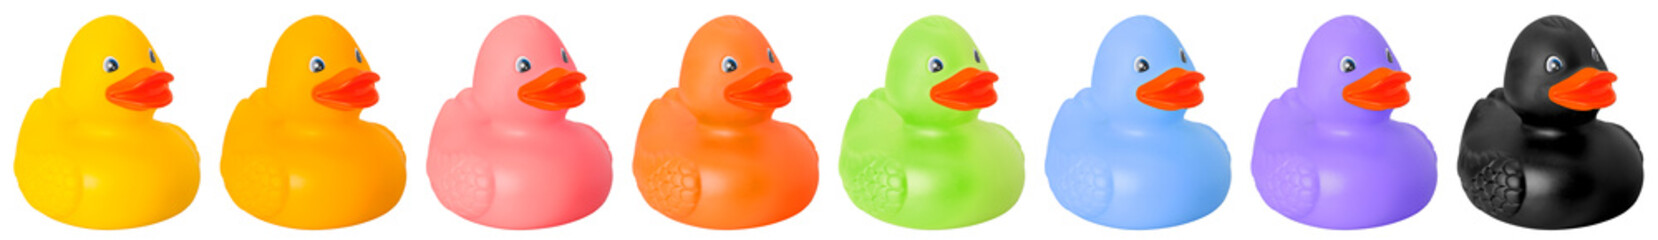 Toy rubber colored ducks isolated on white